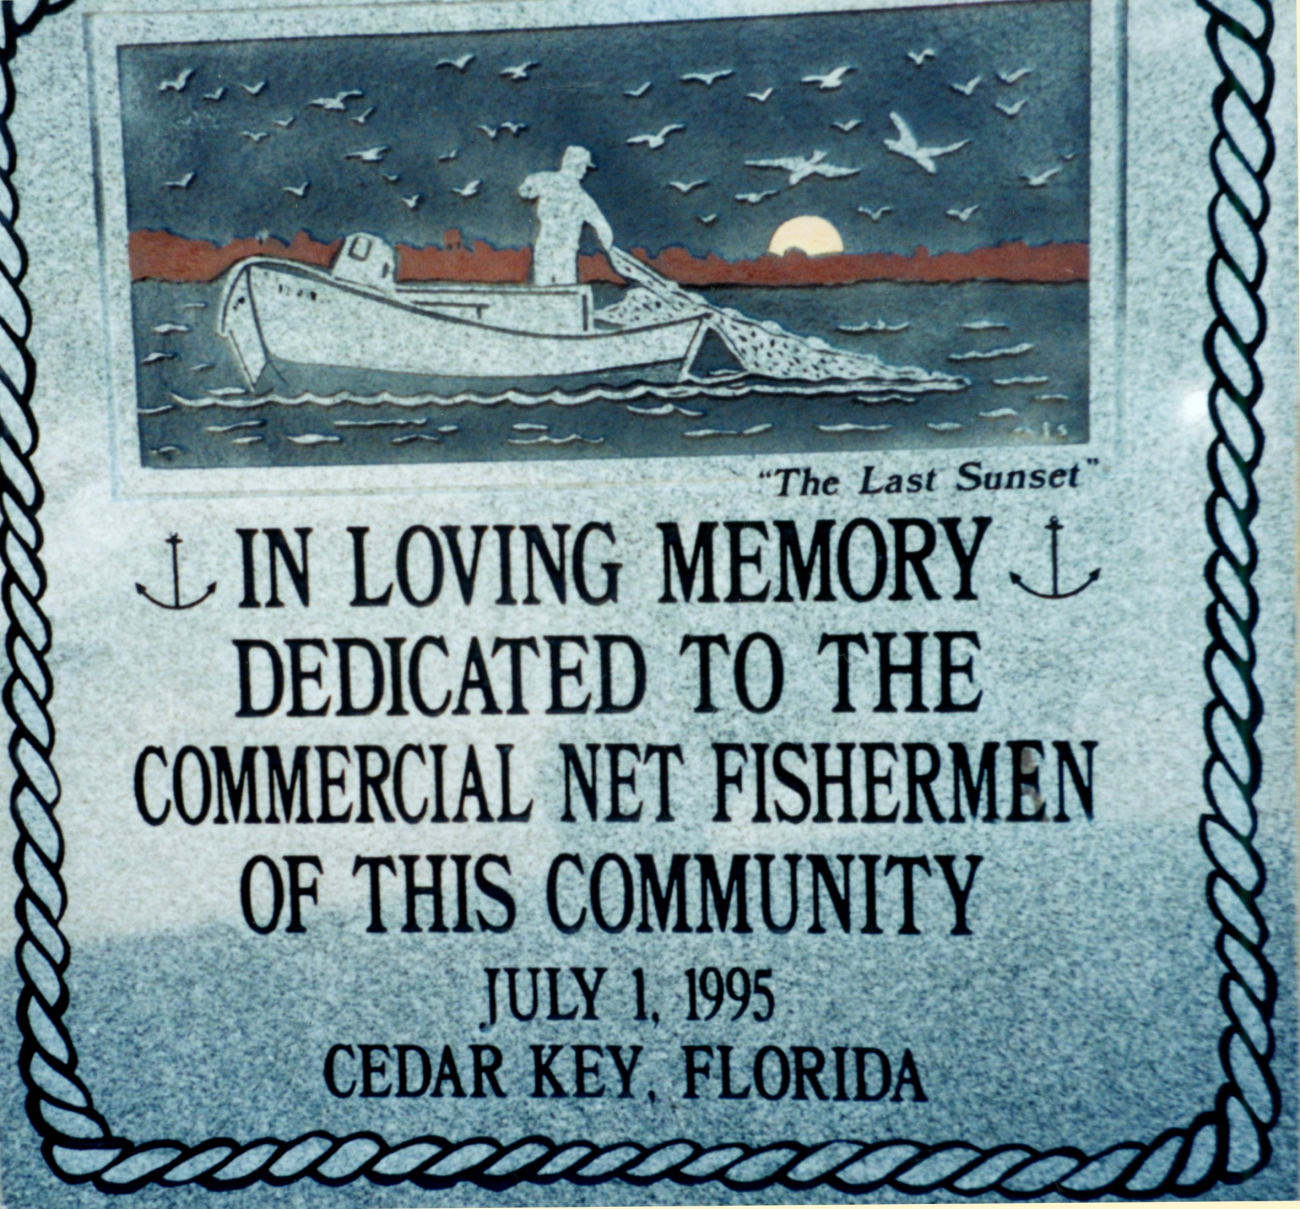 Memorial to the passing of a way of life - the commercial net fishermen of Cedar Key